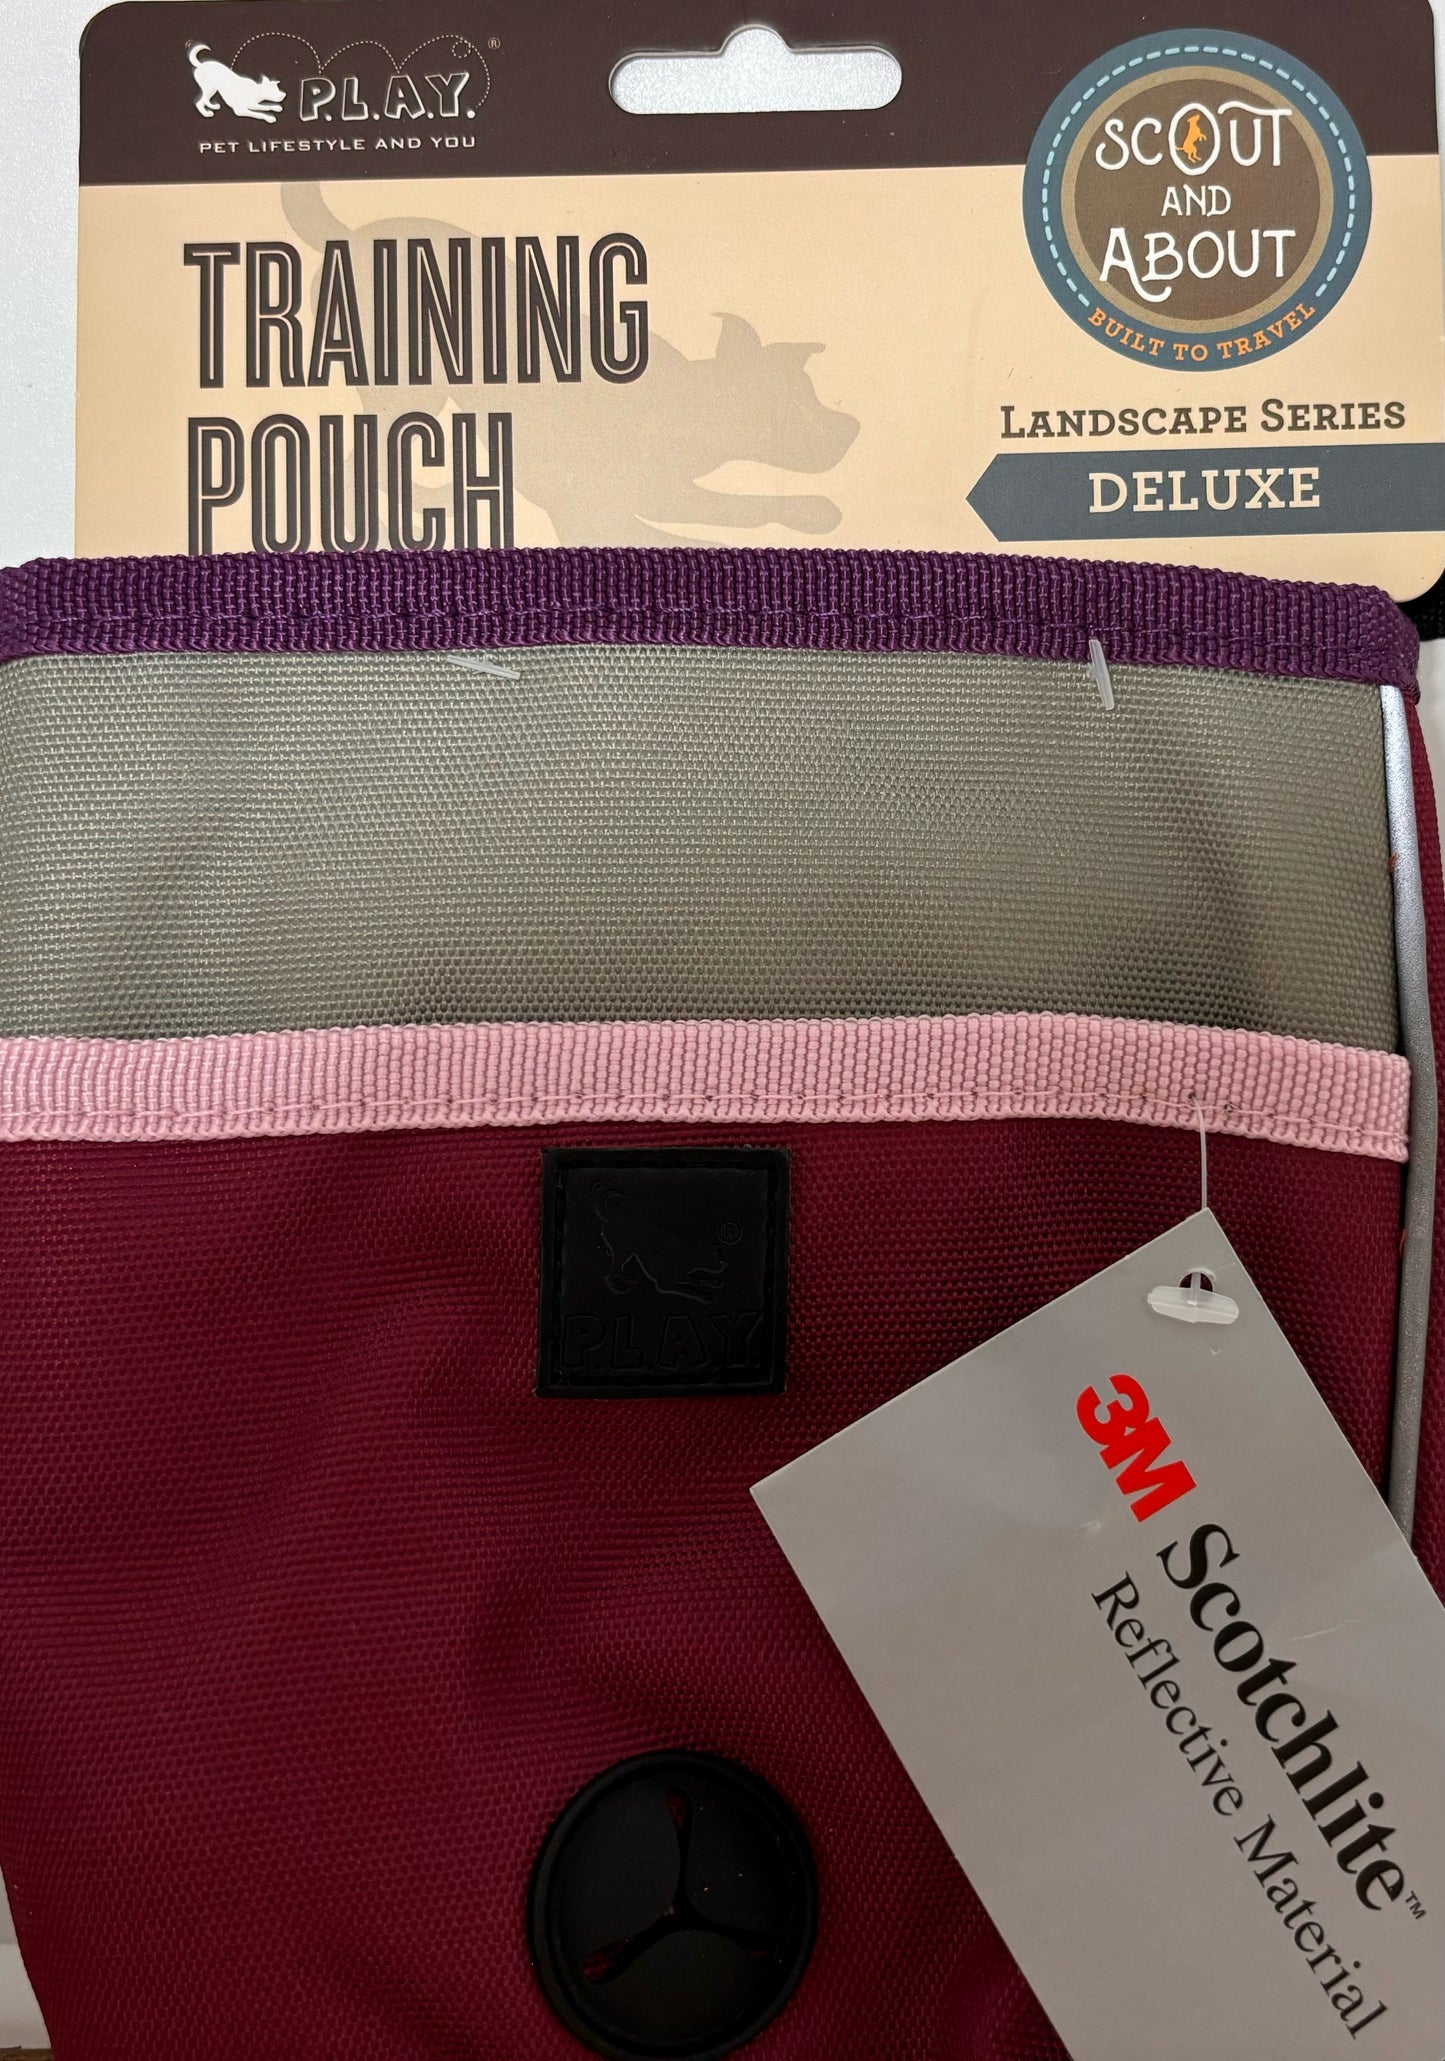 Training pouch